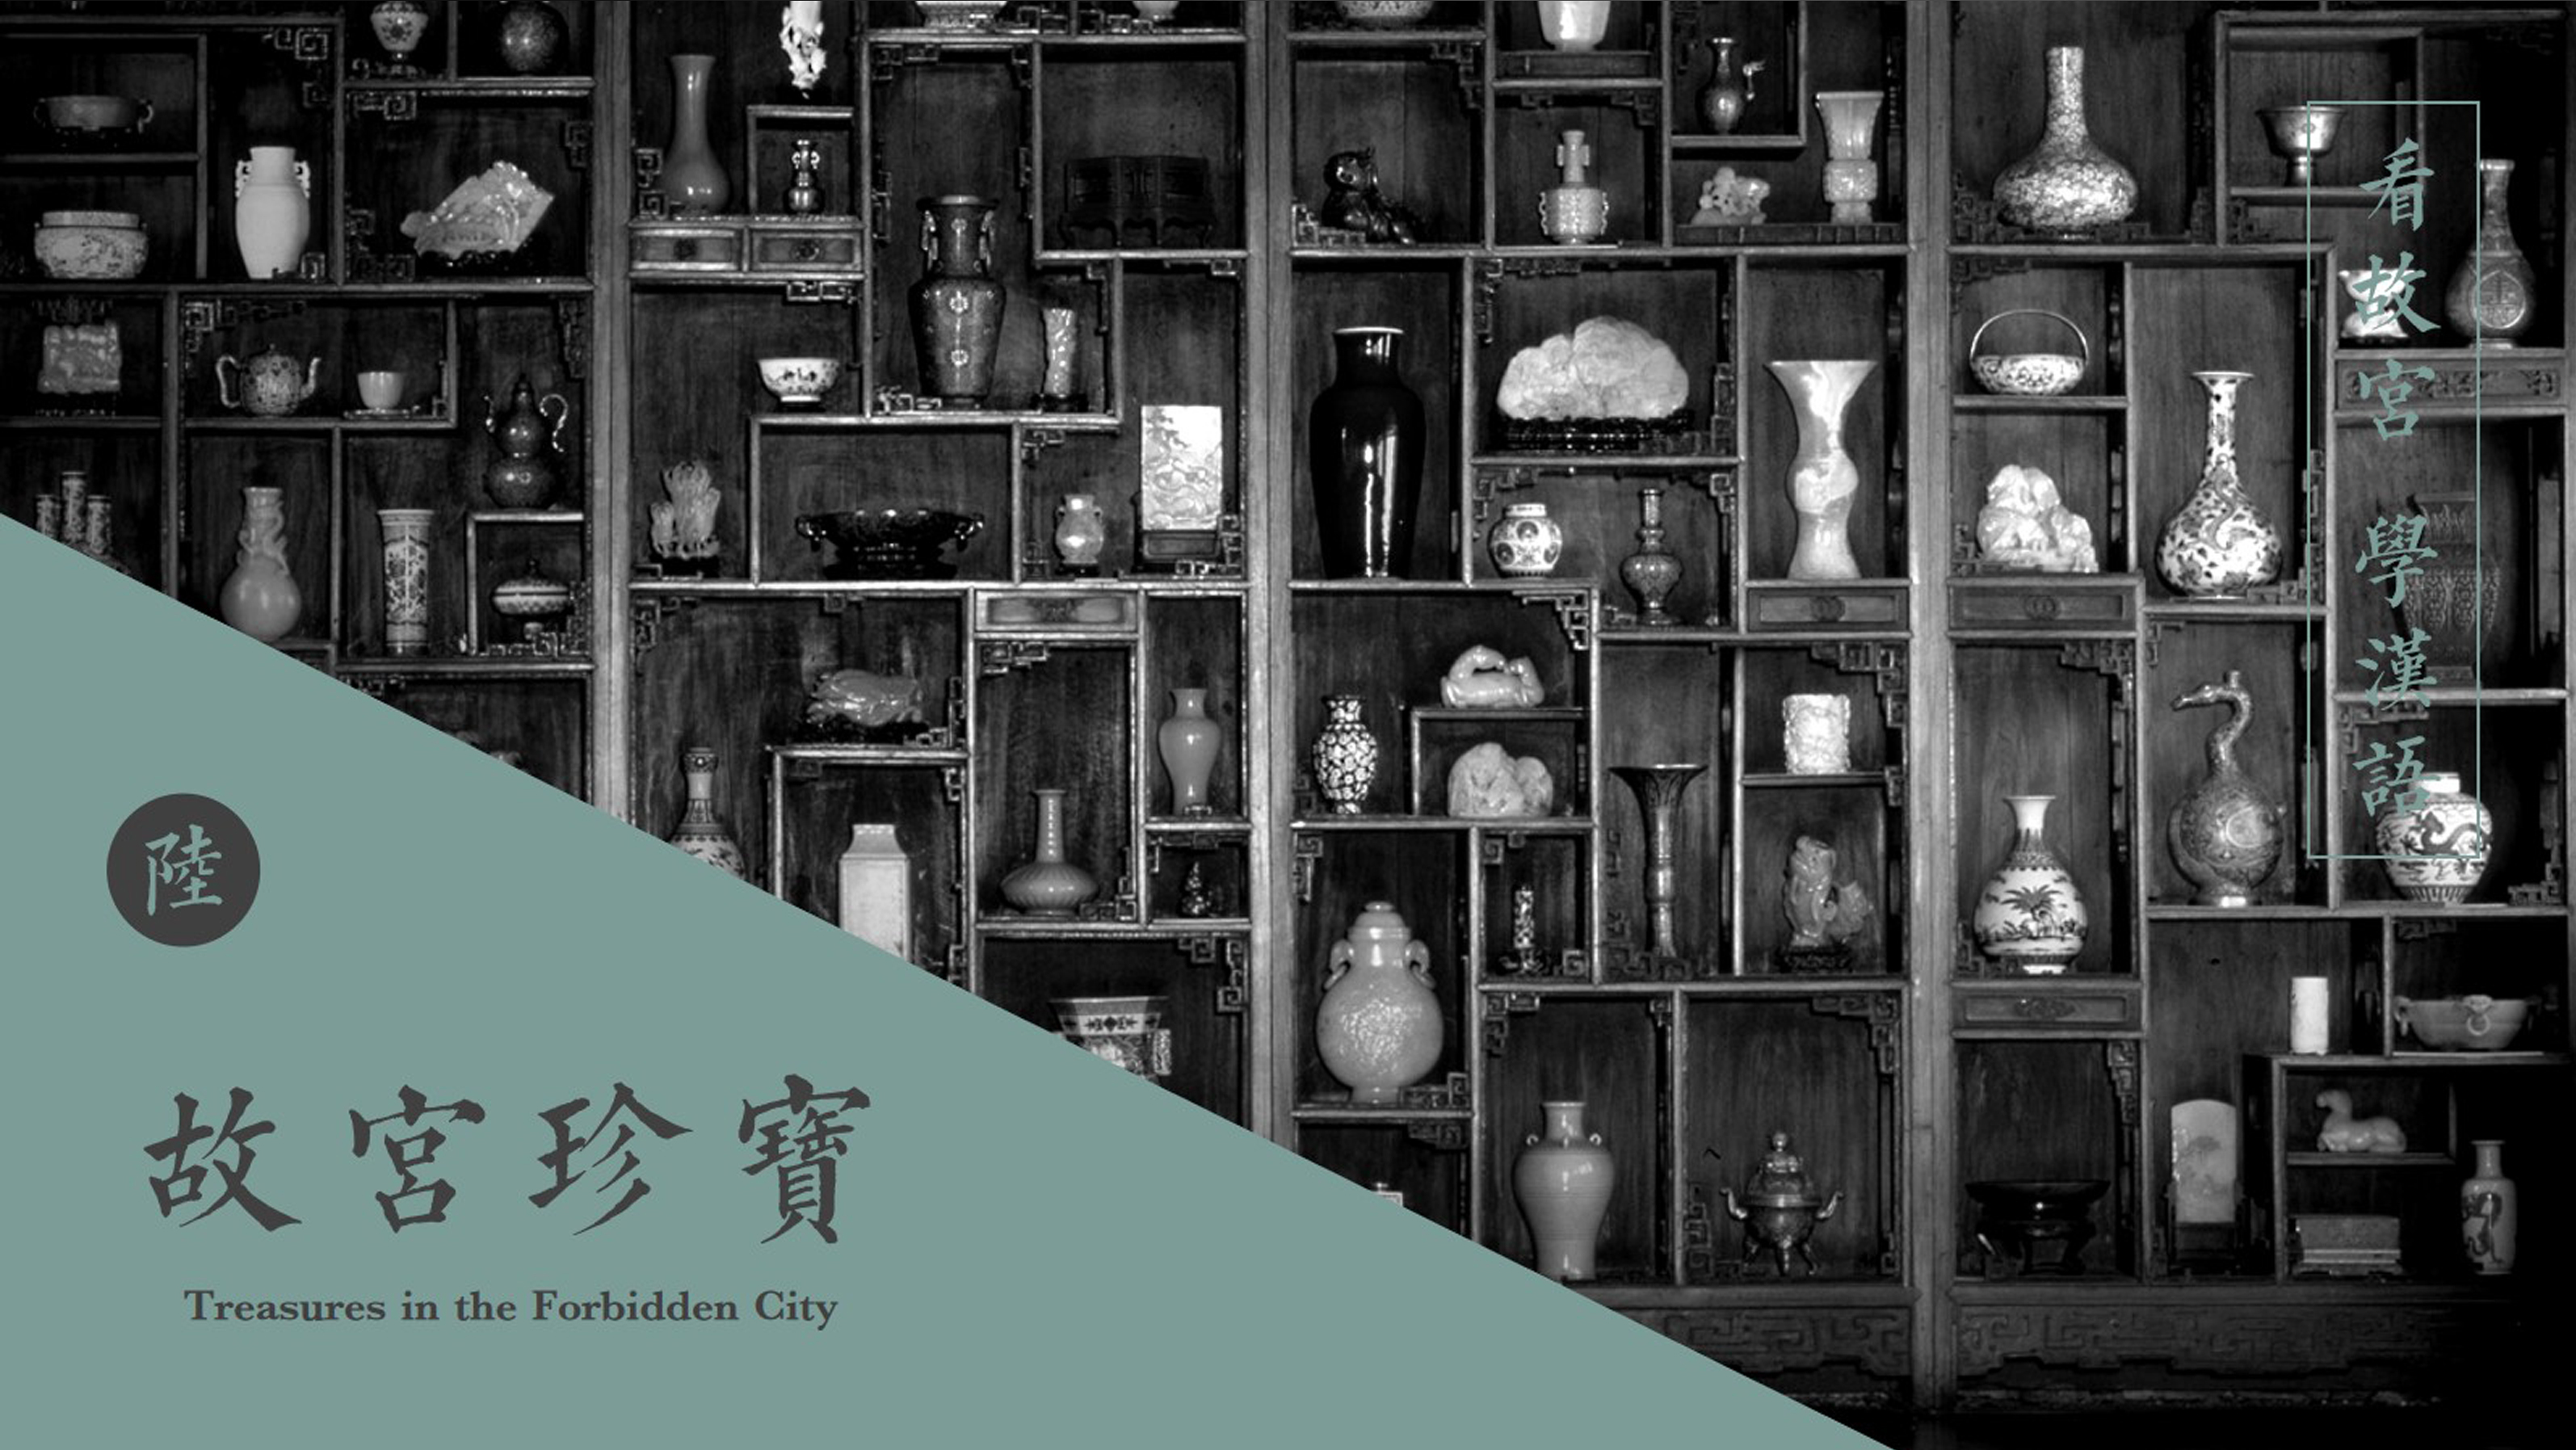 Lecture 6 “Treasures of the Forbidden City”